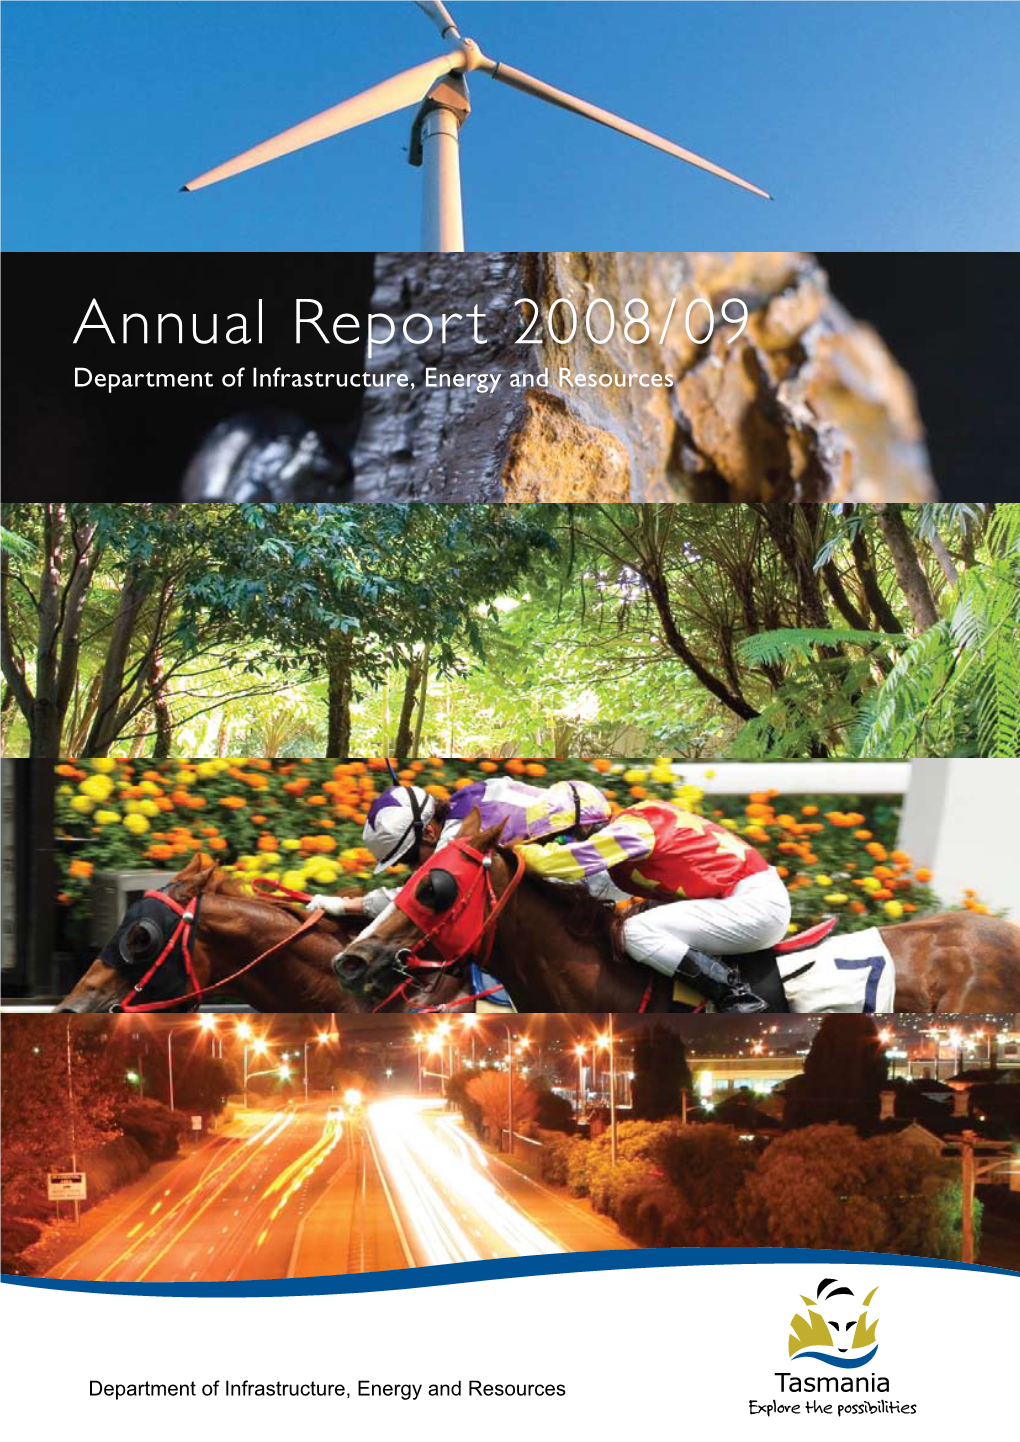 Annual Report 2008/09 Department of Infrastructure, Energy and Resources